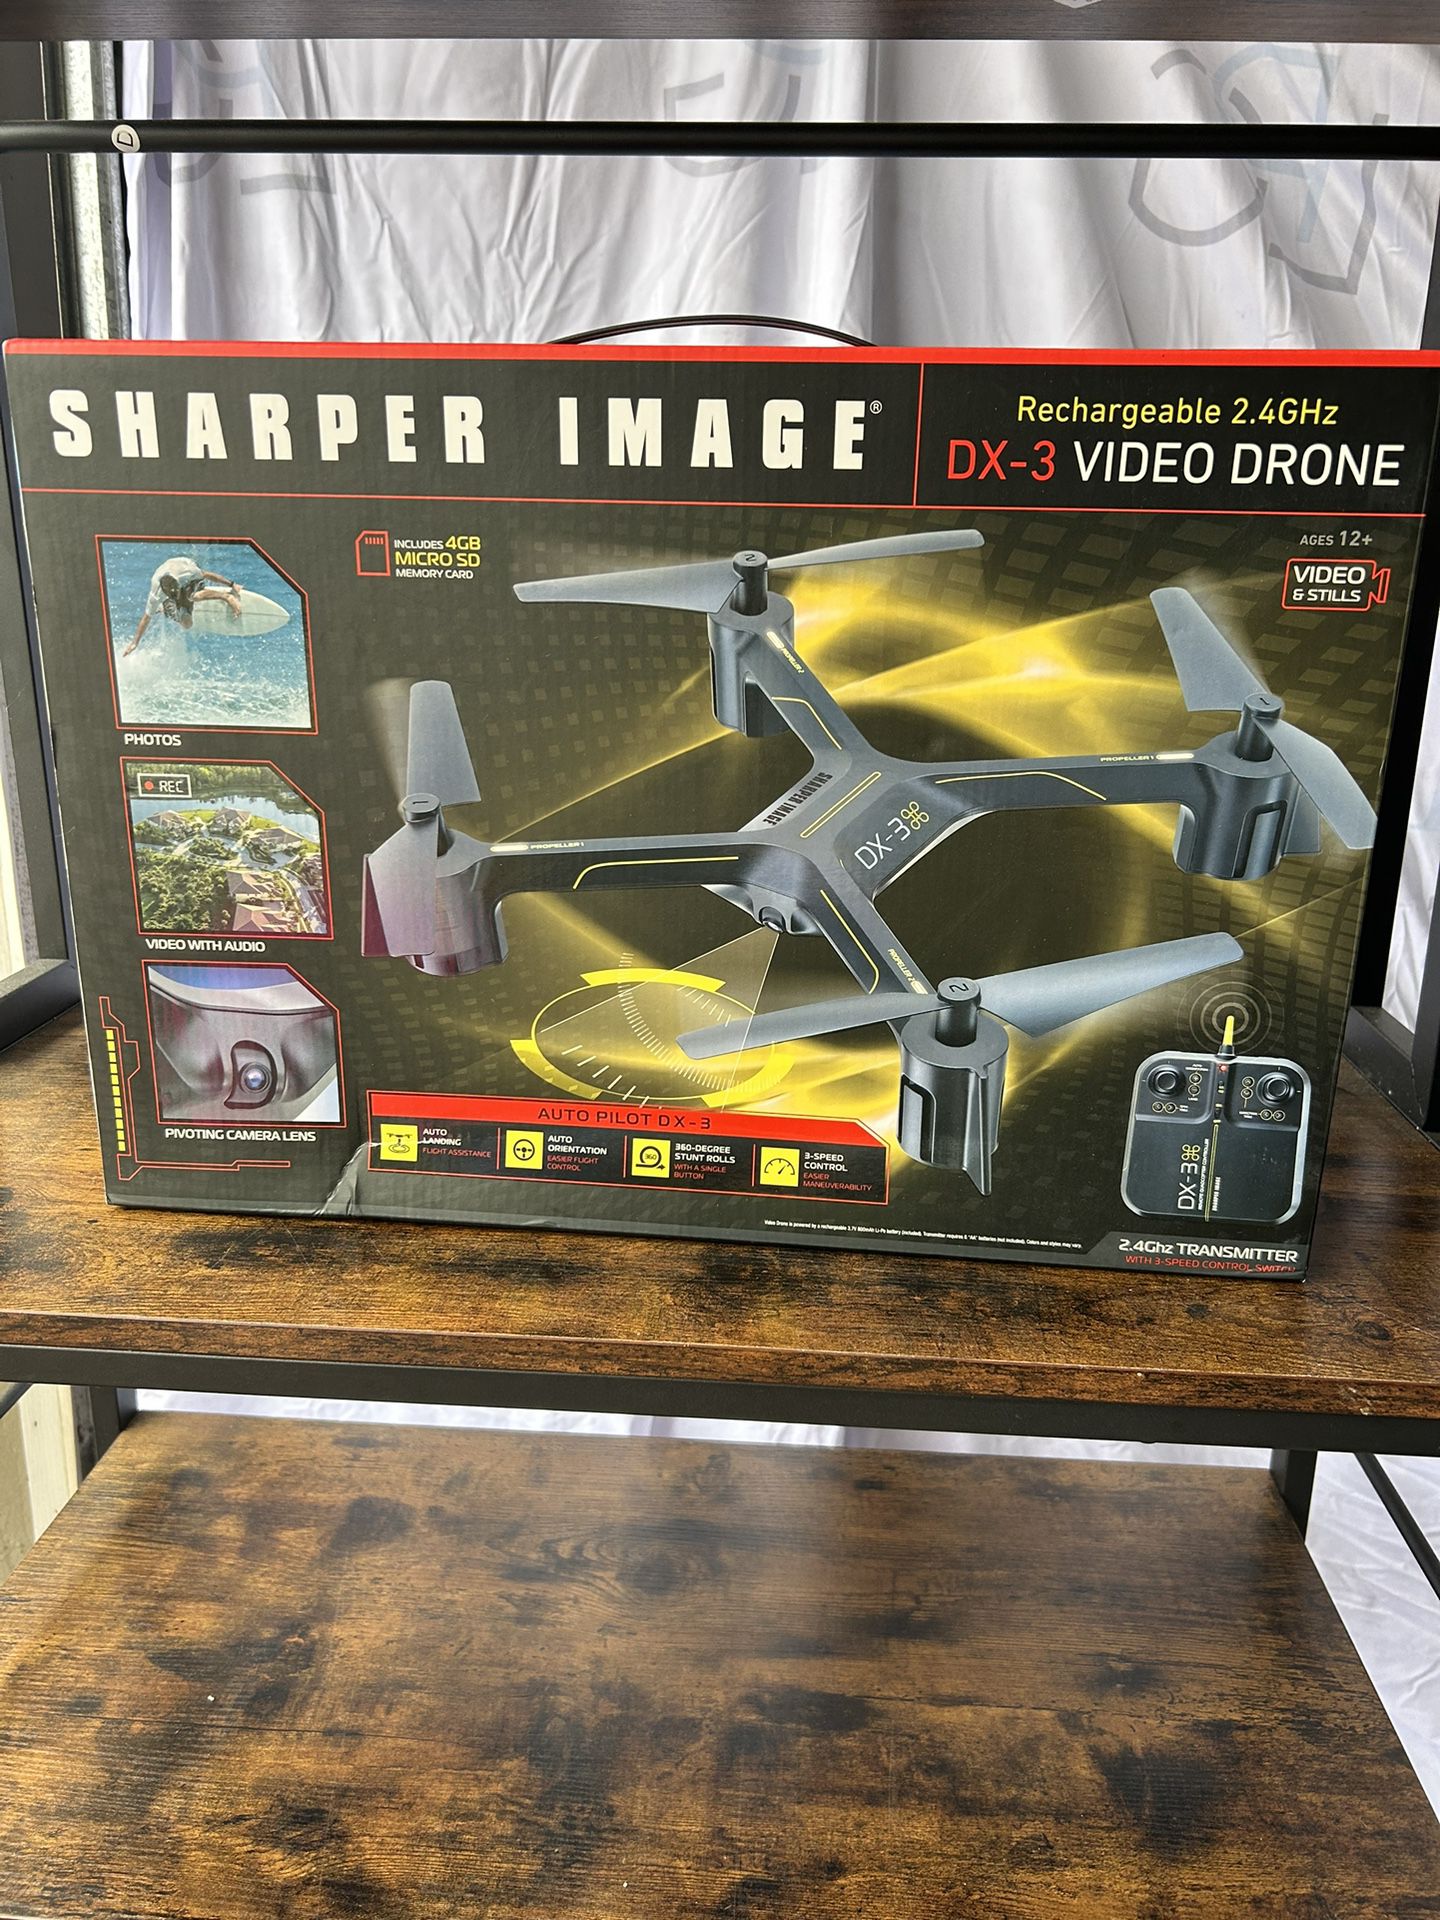 DX-3 Video Drone